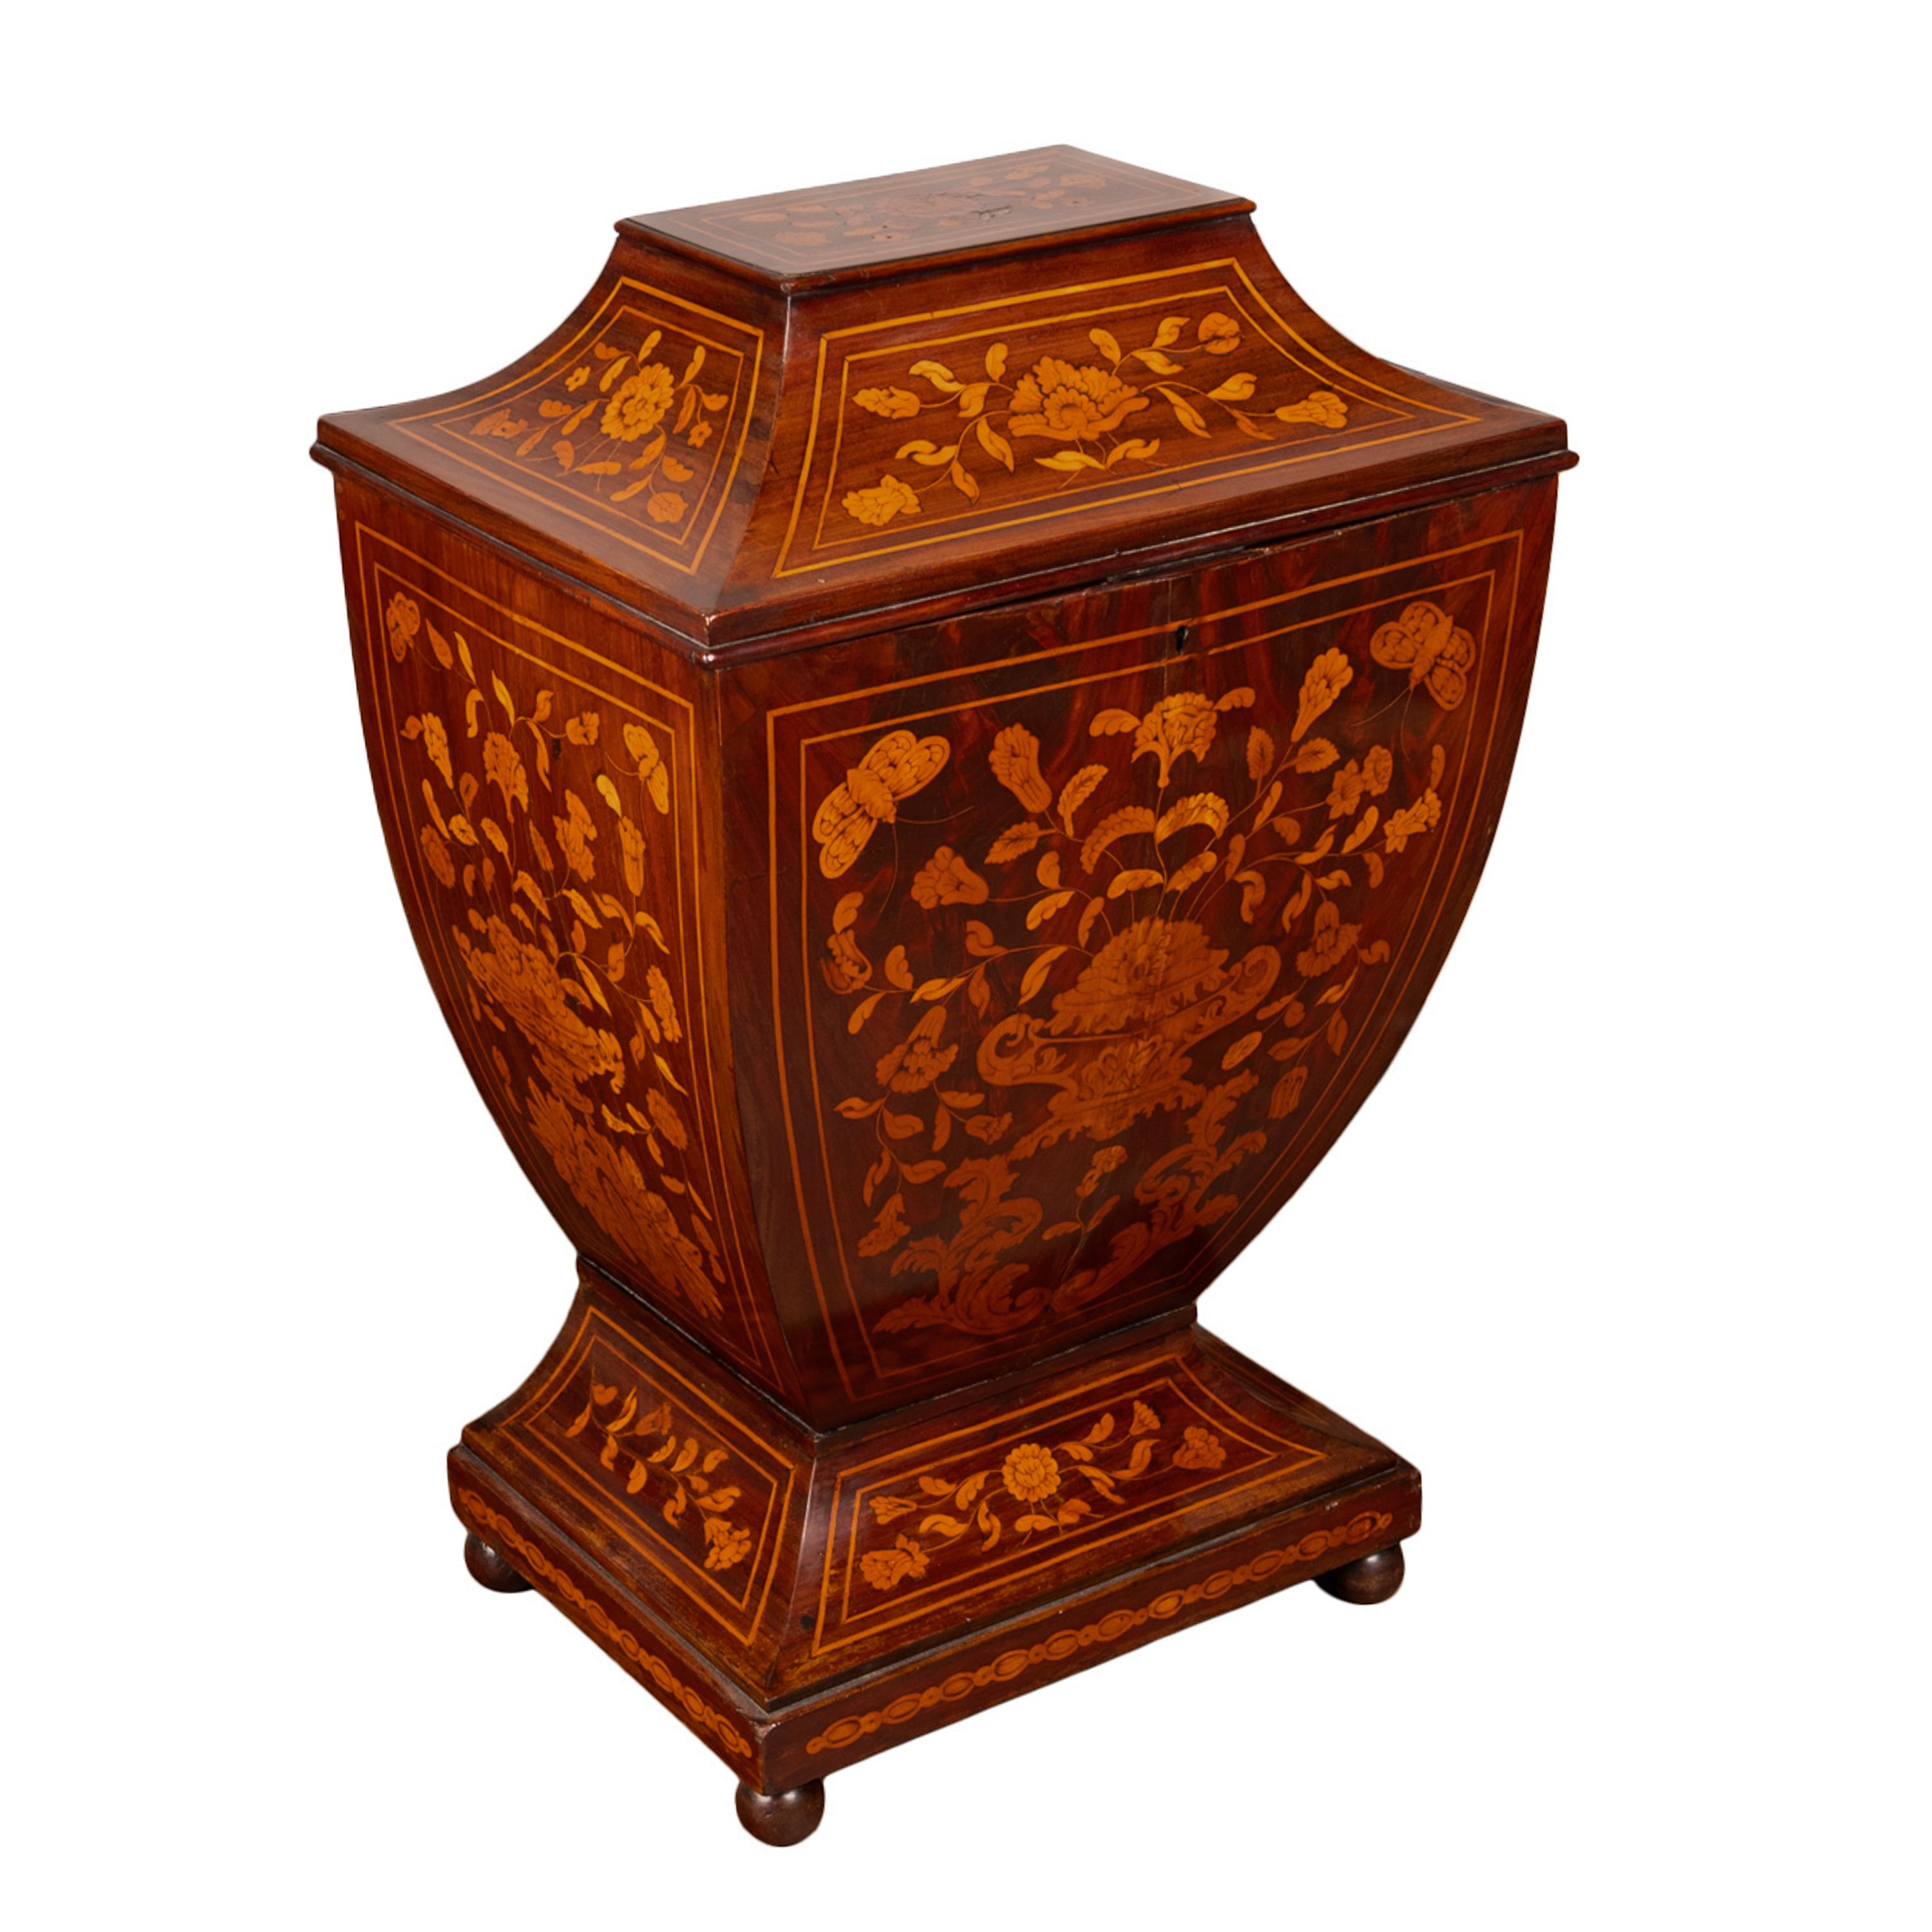 Rococo Antique 18th Century Dutch Marquetry Bombe Shaped Wine Cellerette Cooler 1760 For Sale